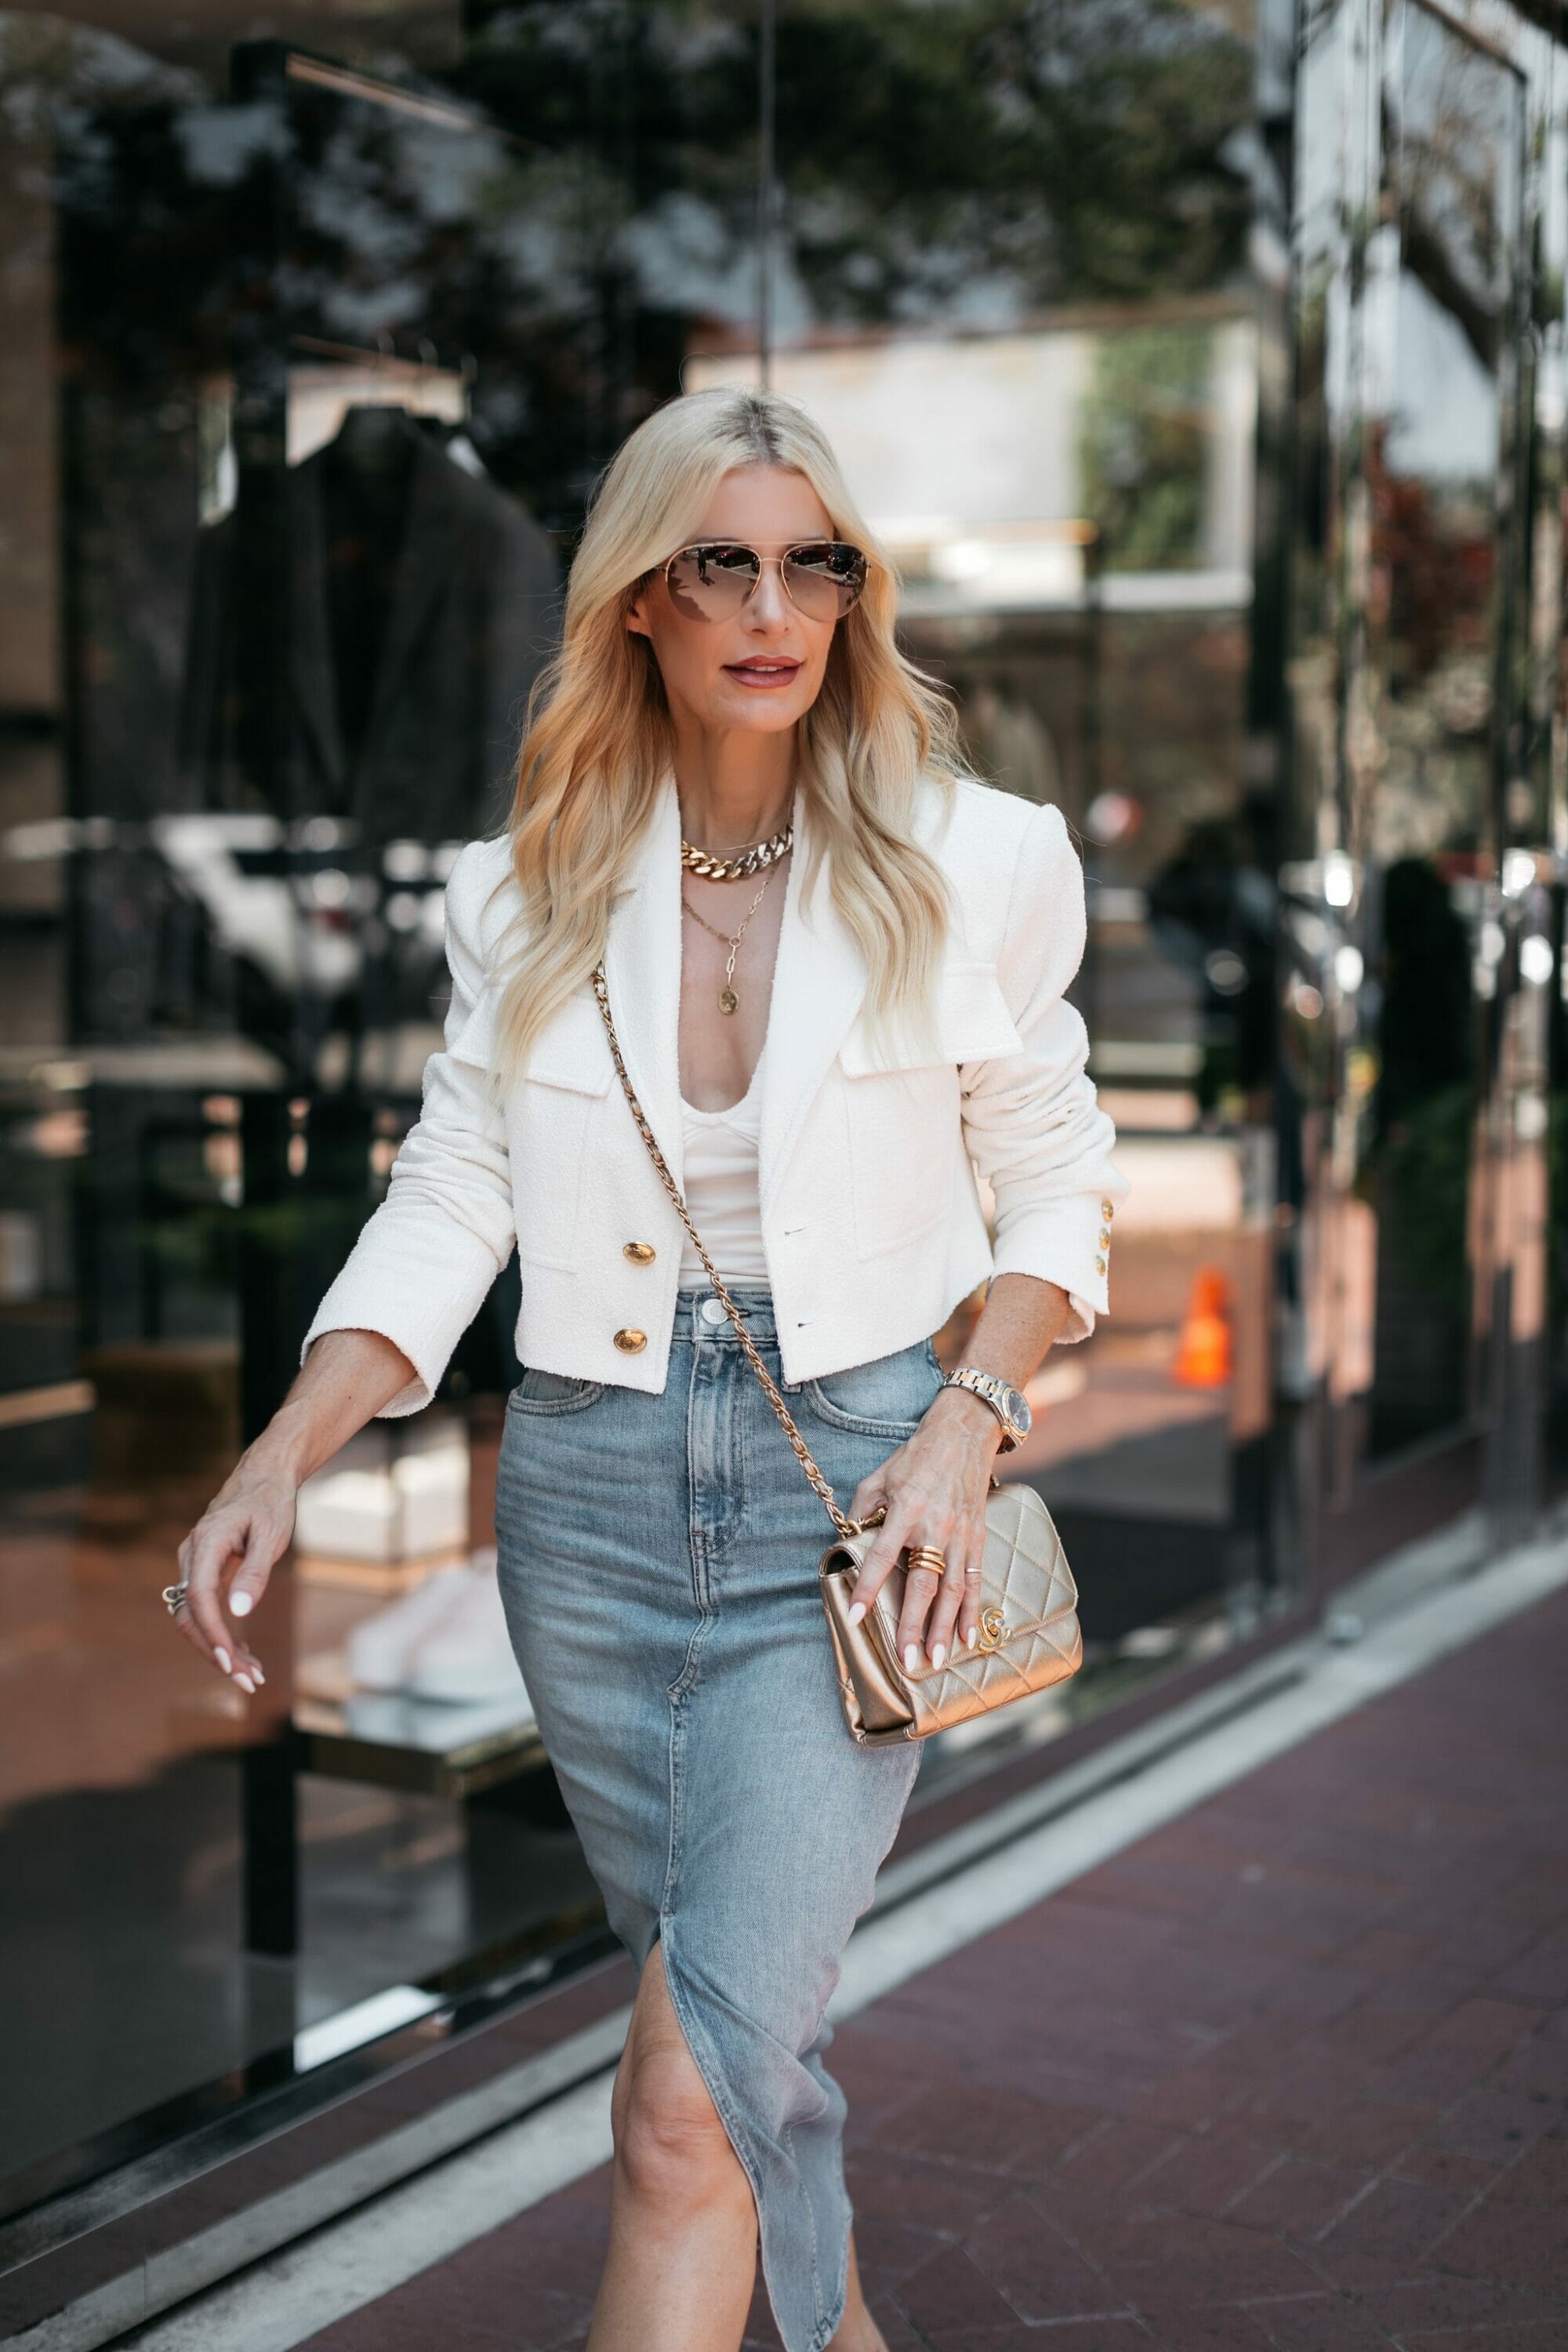 Over 40 Dallas fashion stylist wearing white cropped blazer with denim midi skirt and gold accessories.